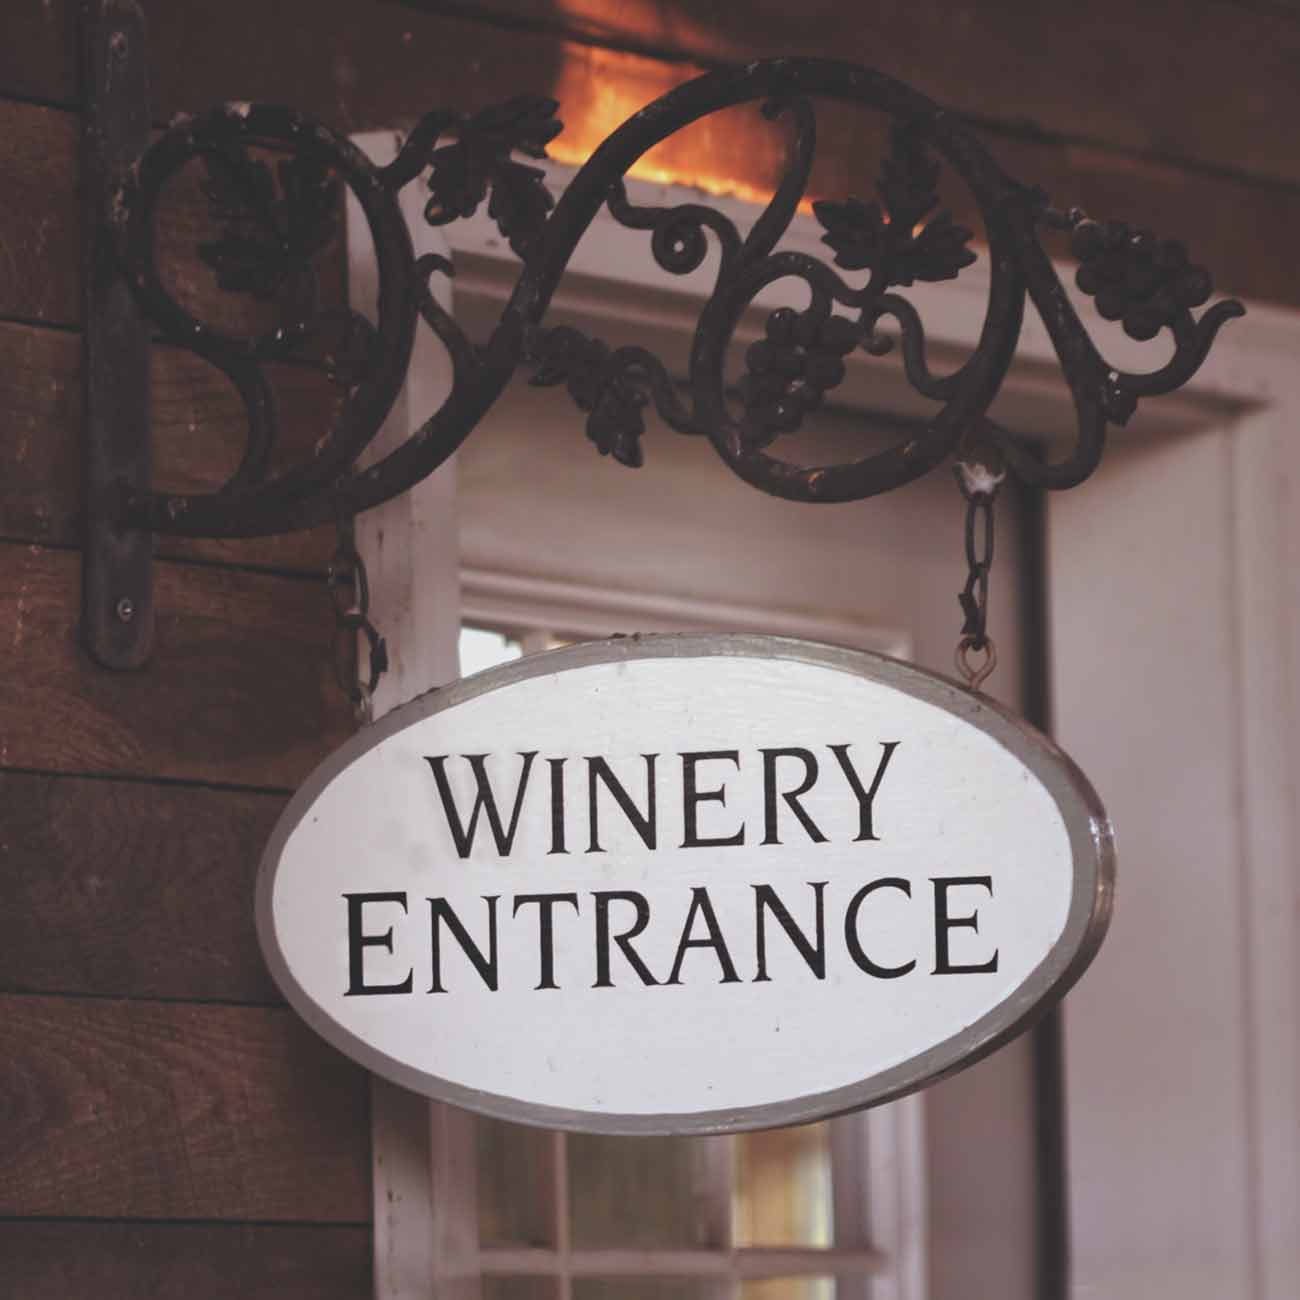 Enter an American Winery